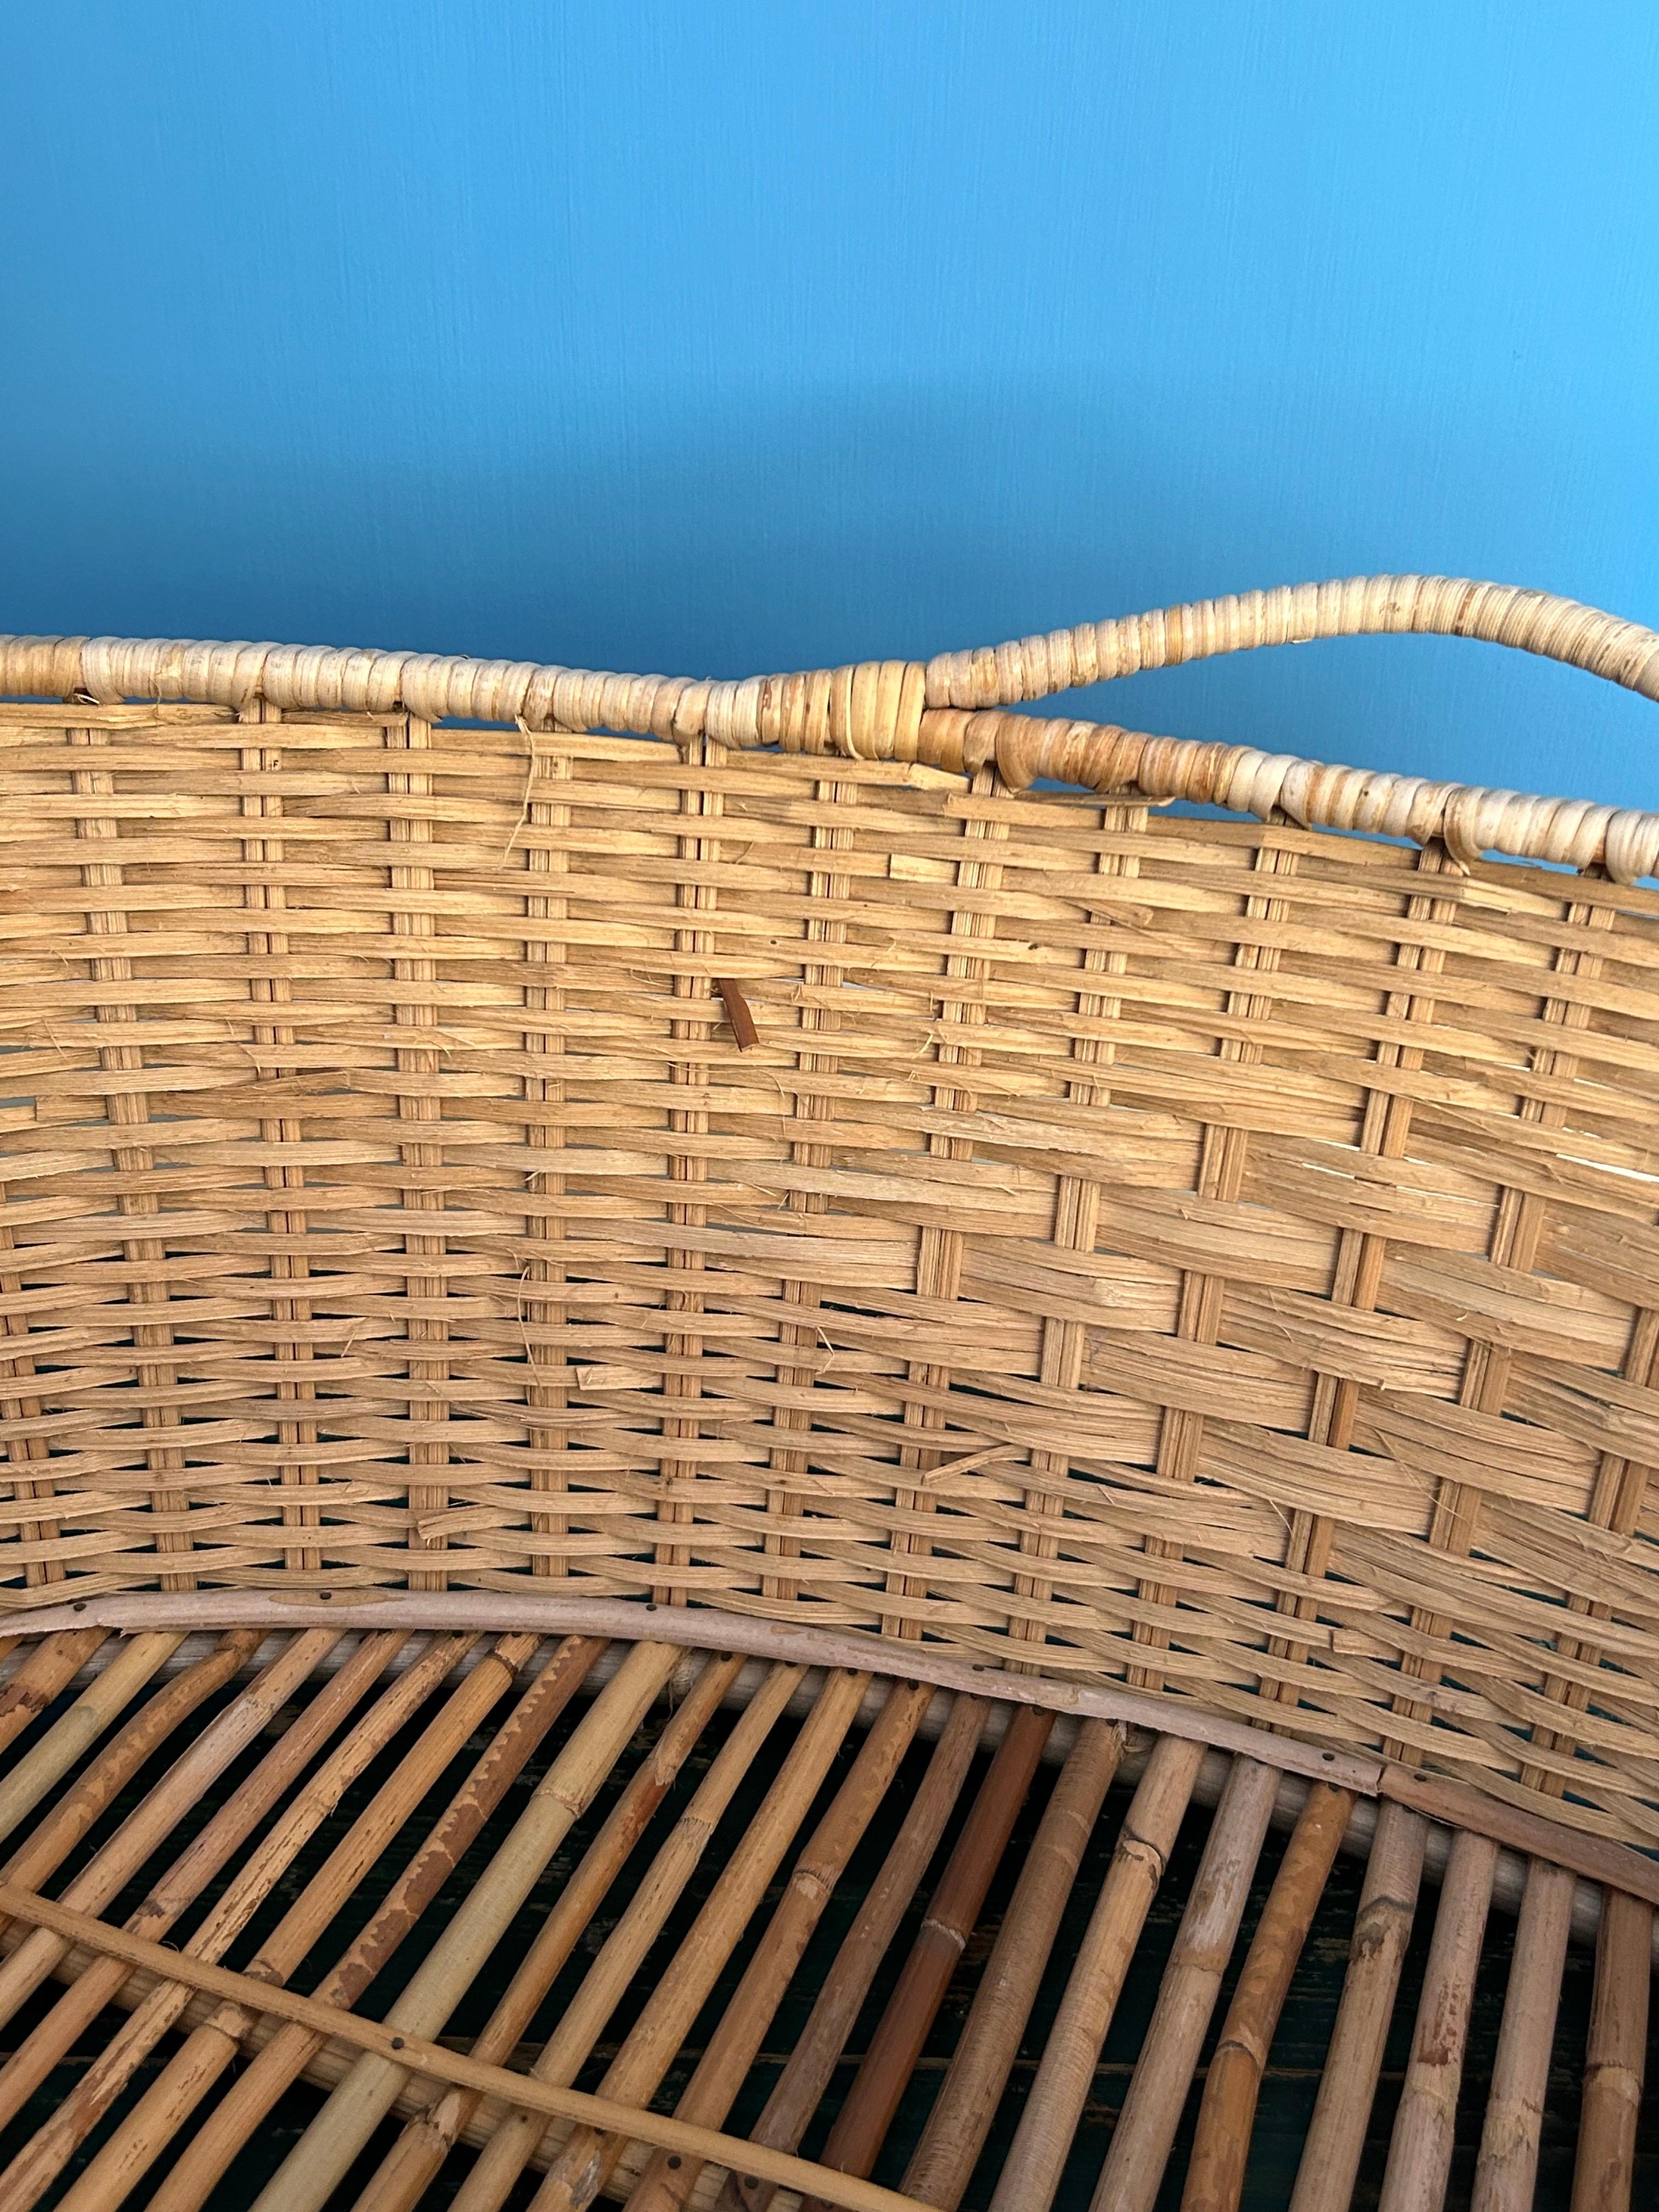 Vintage Oval Rattan Basket with Handles, France, 20th Century For Sale 7